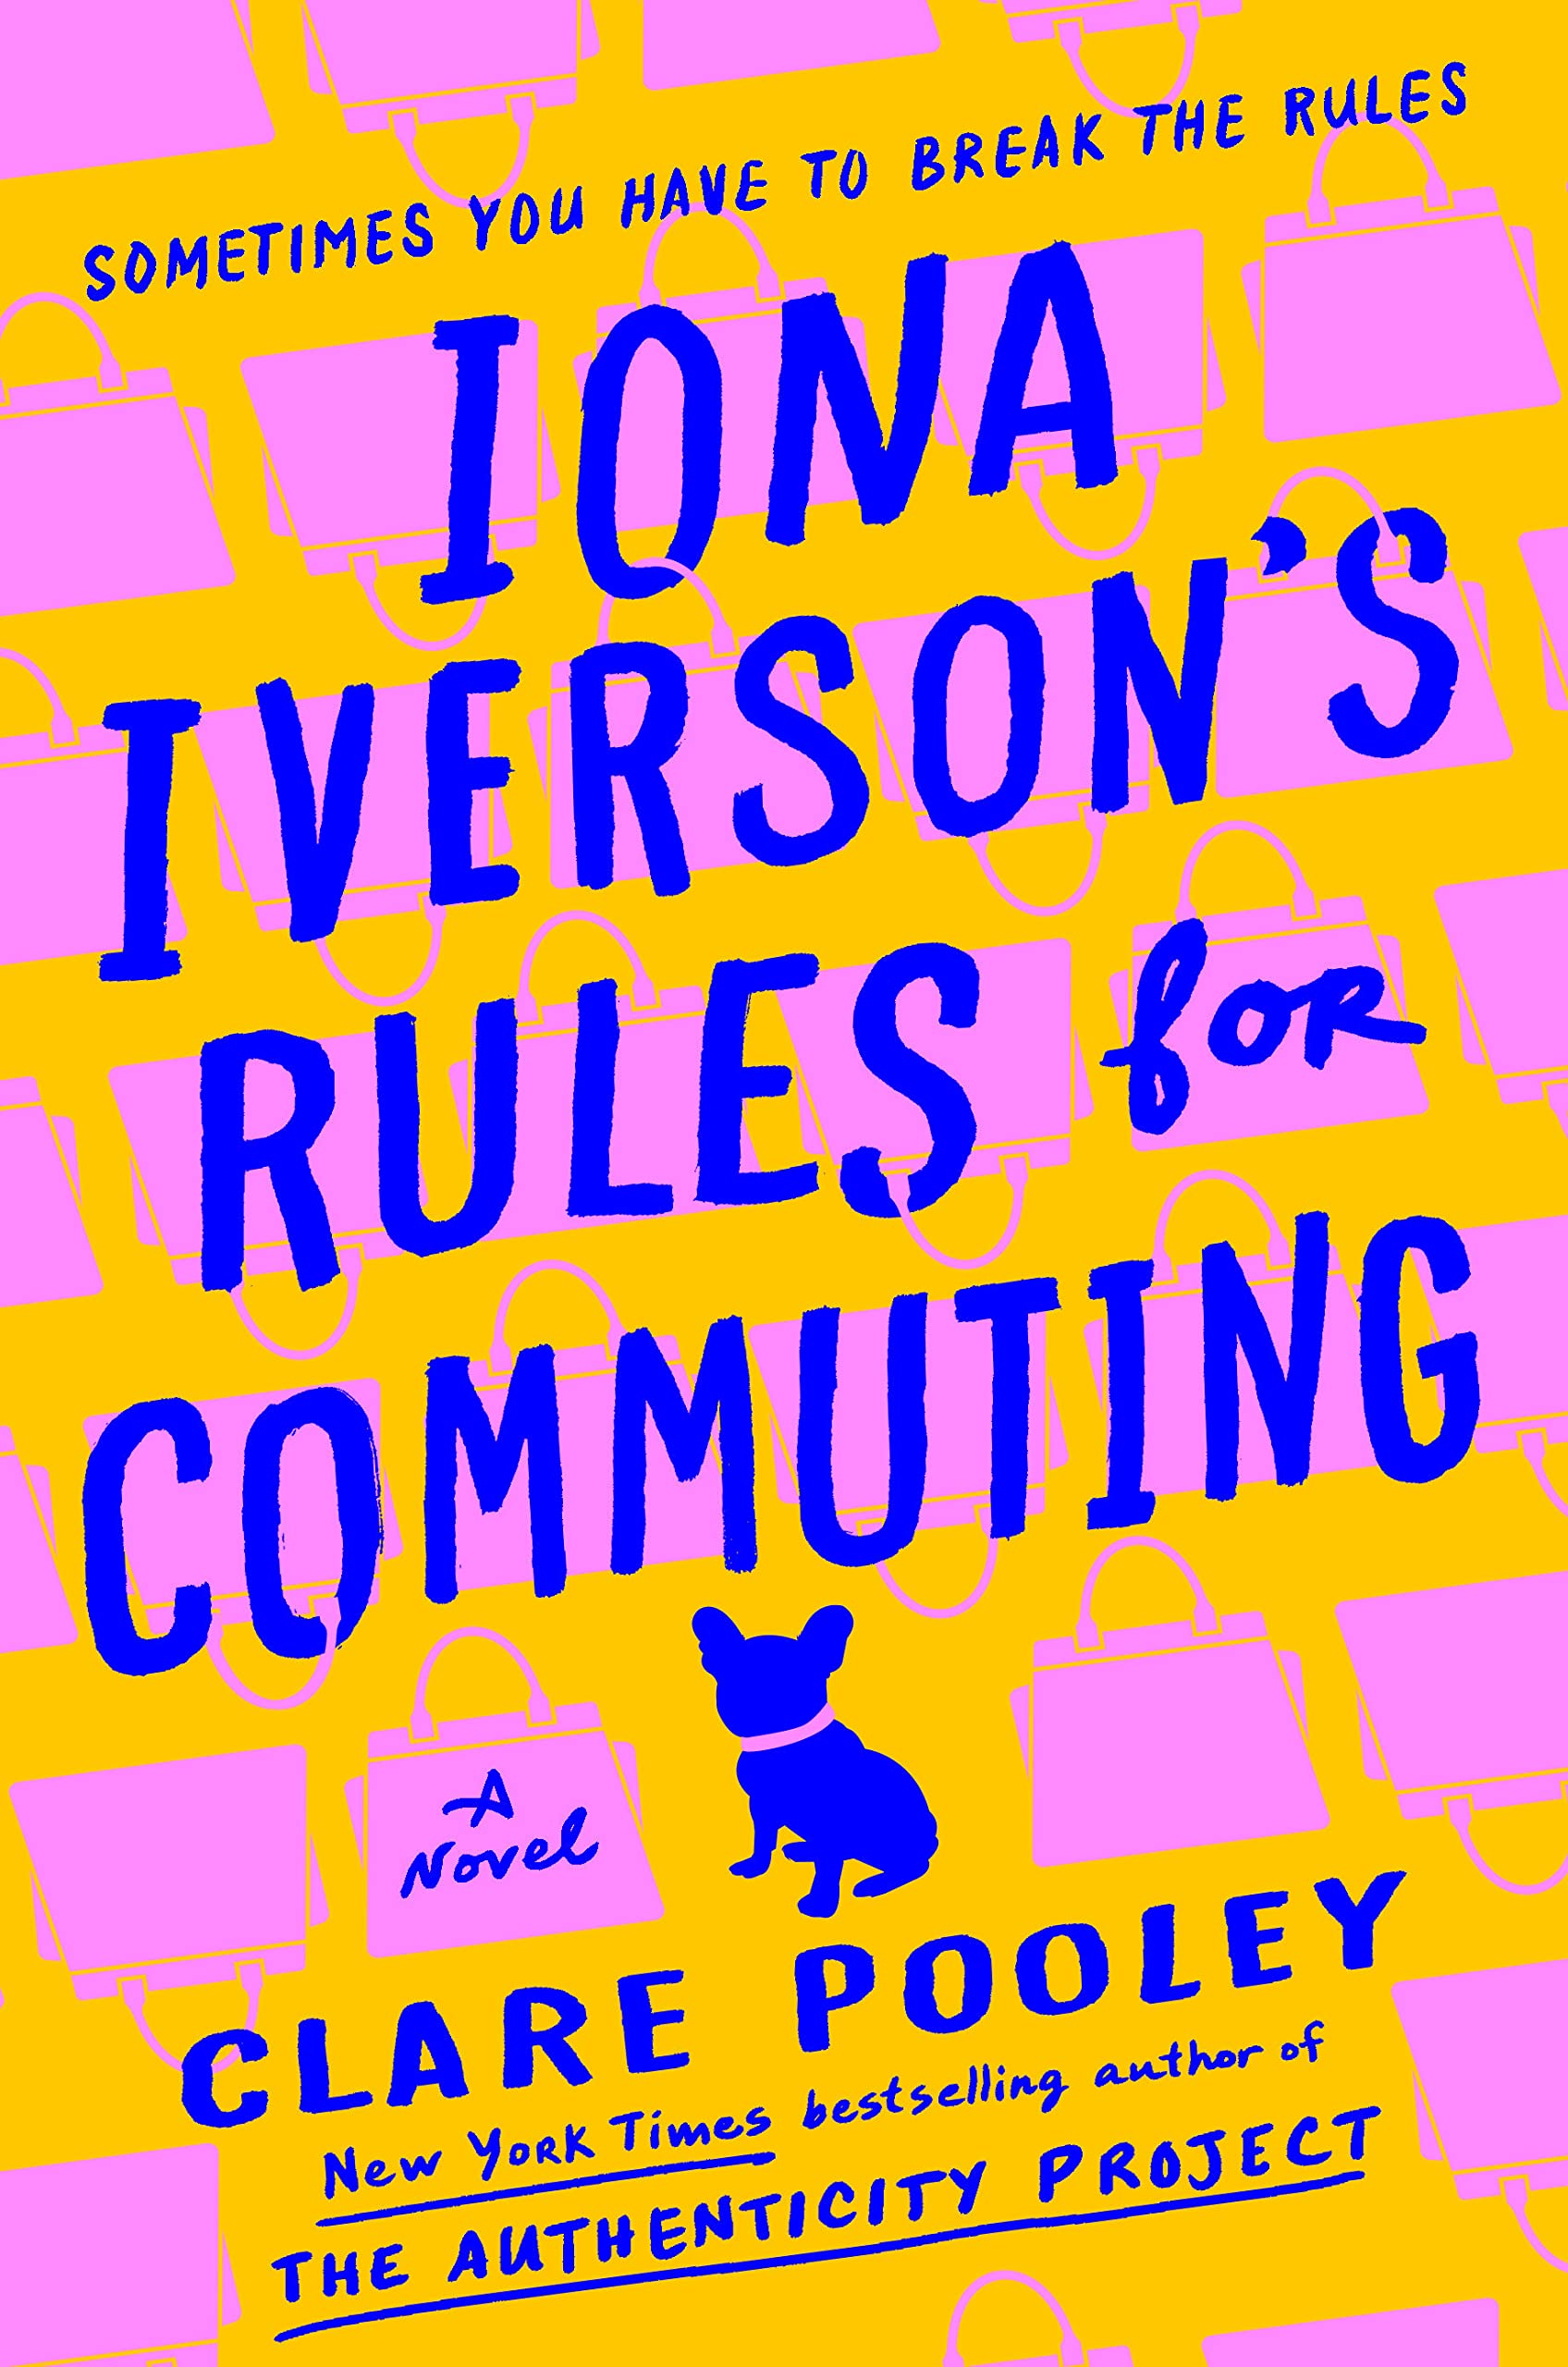 Iona Iverson’s Rules for Commuting